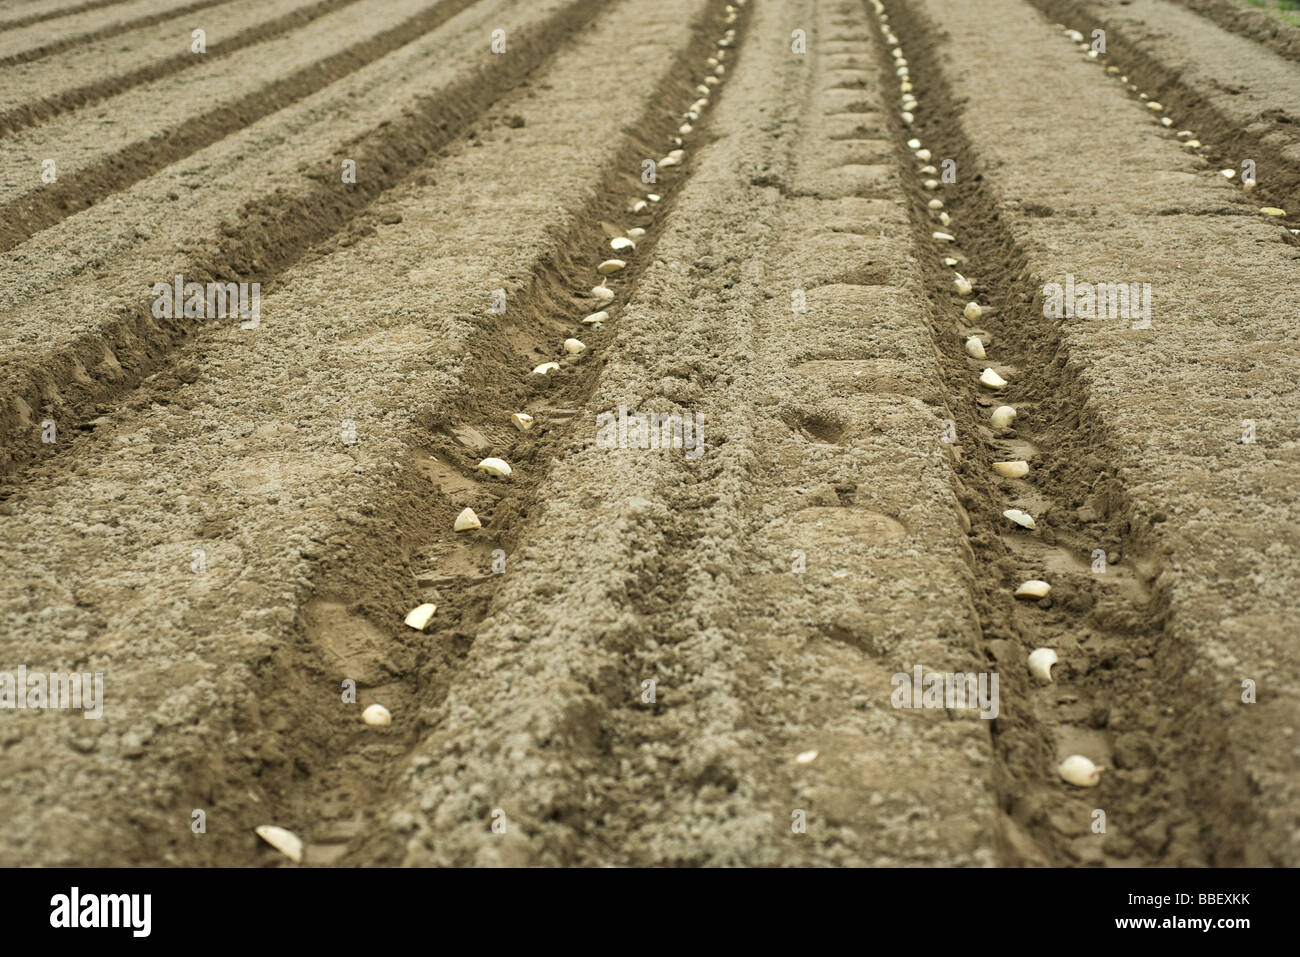 Potatoes planted in neat furrows Stock Photo